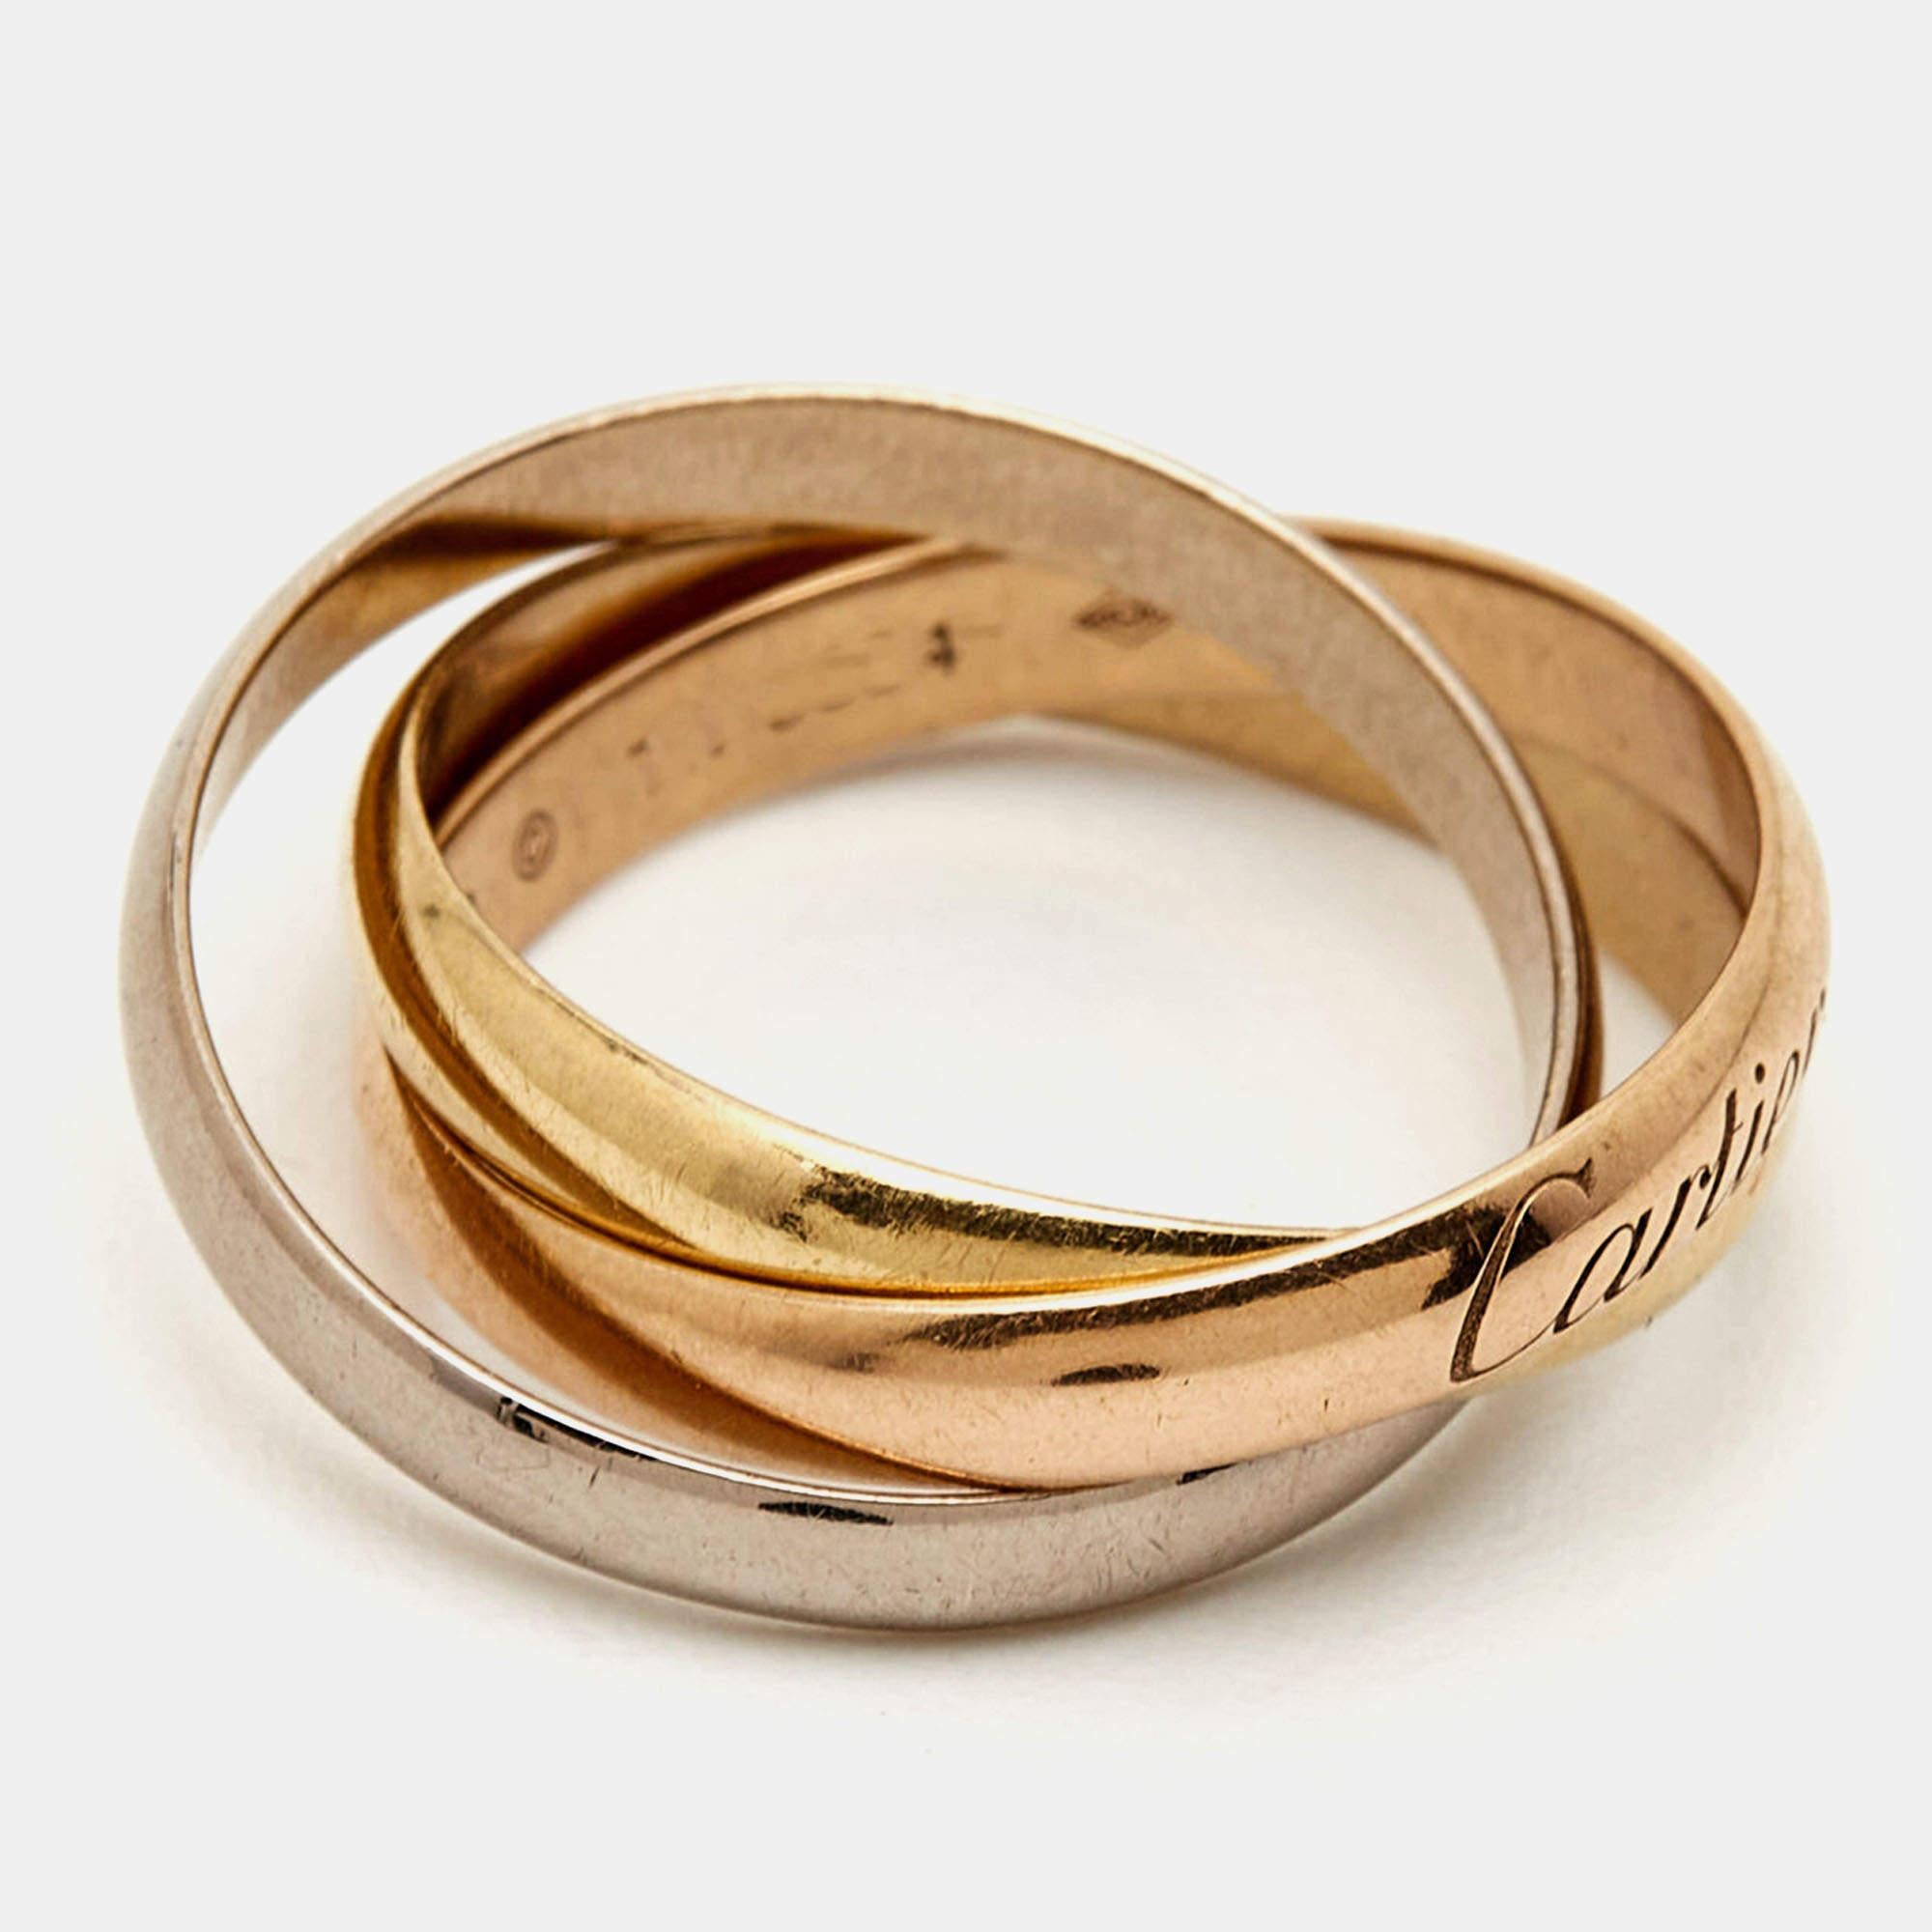 The Cartier Trinity ring is a luxurious and iconic piece of jewelry. Crafted from 18k white, yellow, and rose gold, the ring features interlocking bands symbolizing love, fidelity, and friendship. Its small size adds a touch of elegance, making it a